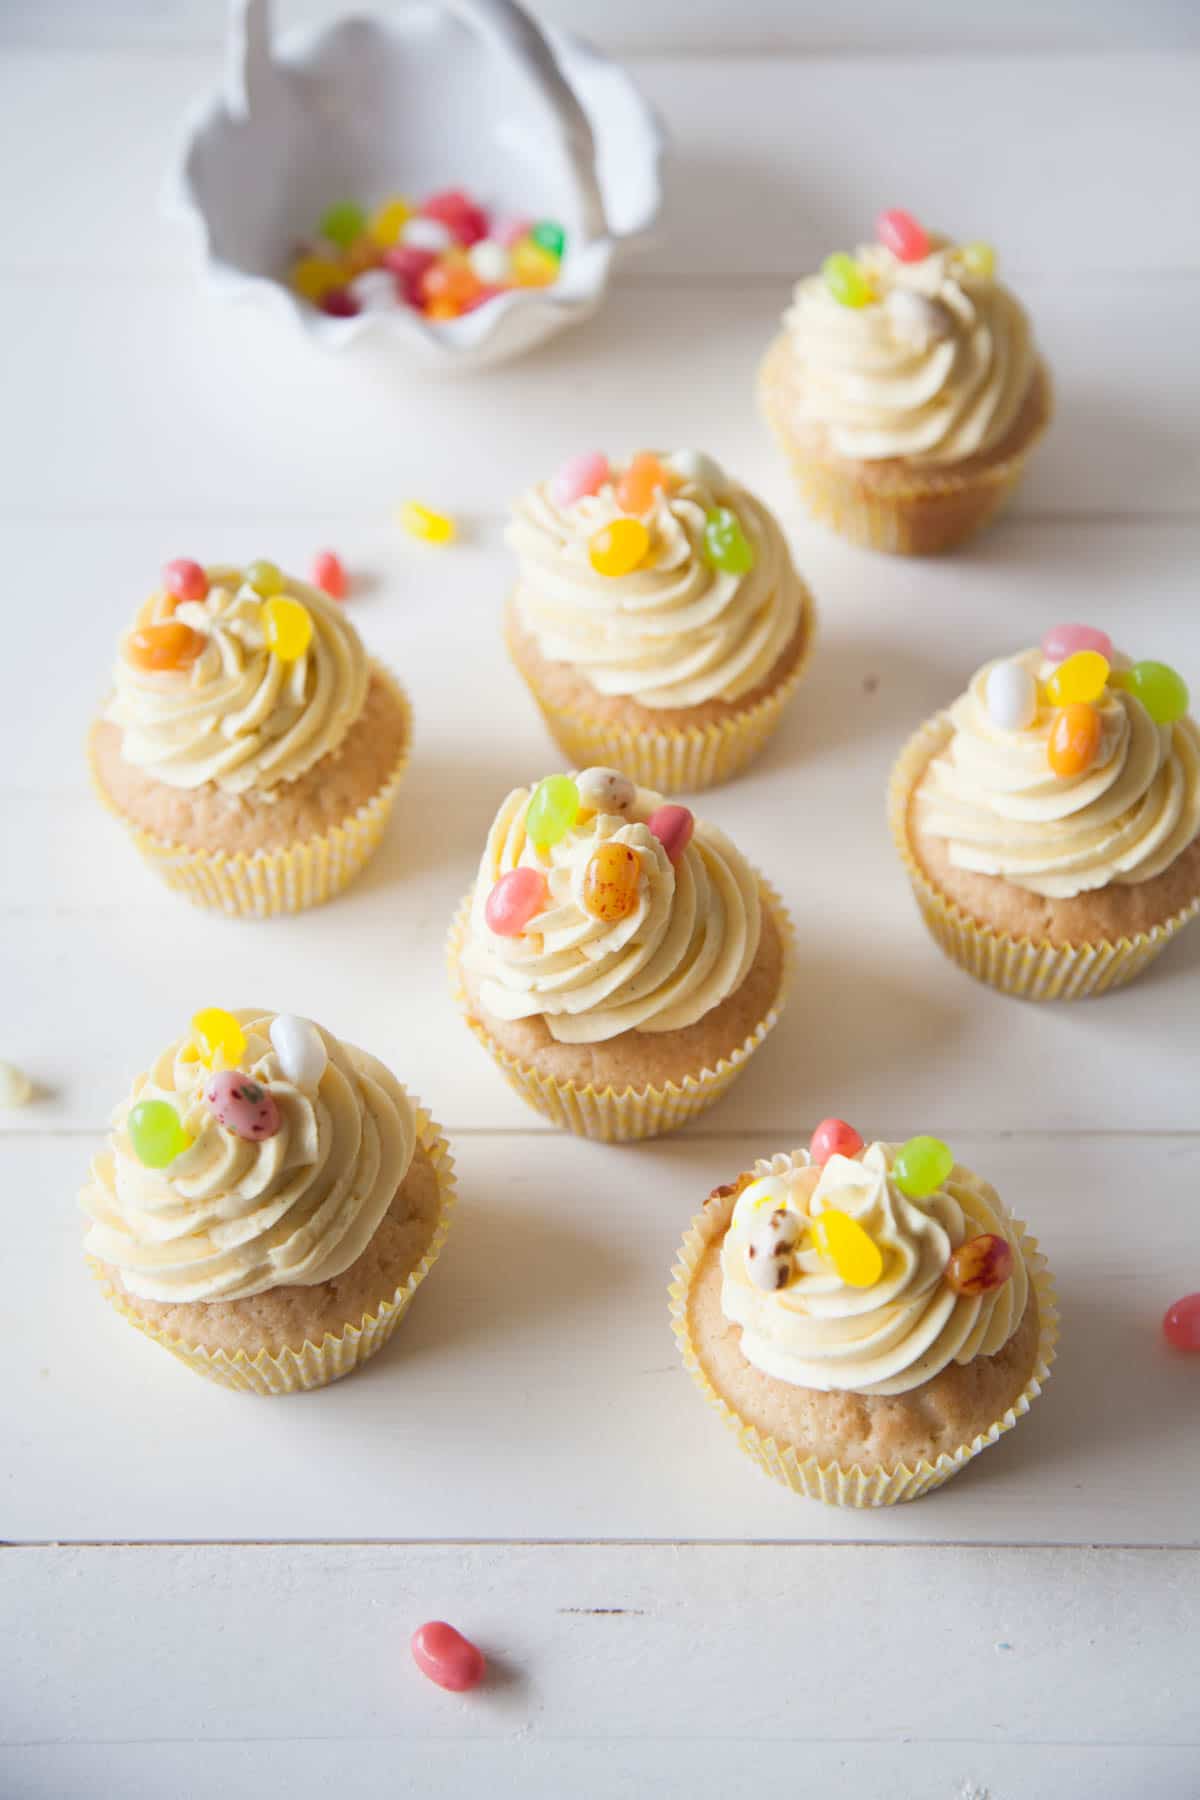 Vegan Lemon Cupcakes for Easter - Light, fluffy lemon cupcakes topped with dairy-free zesty buttercream and jelly beans!